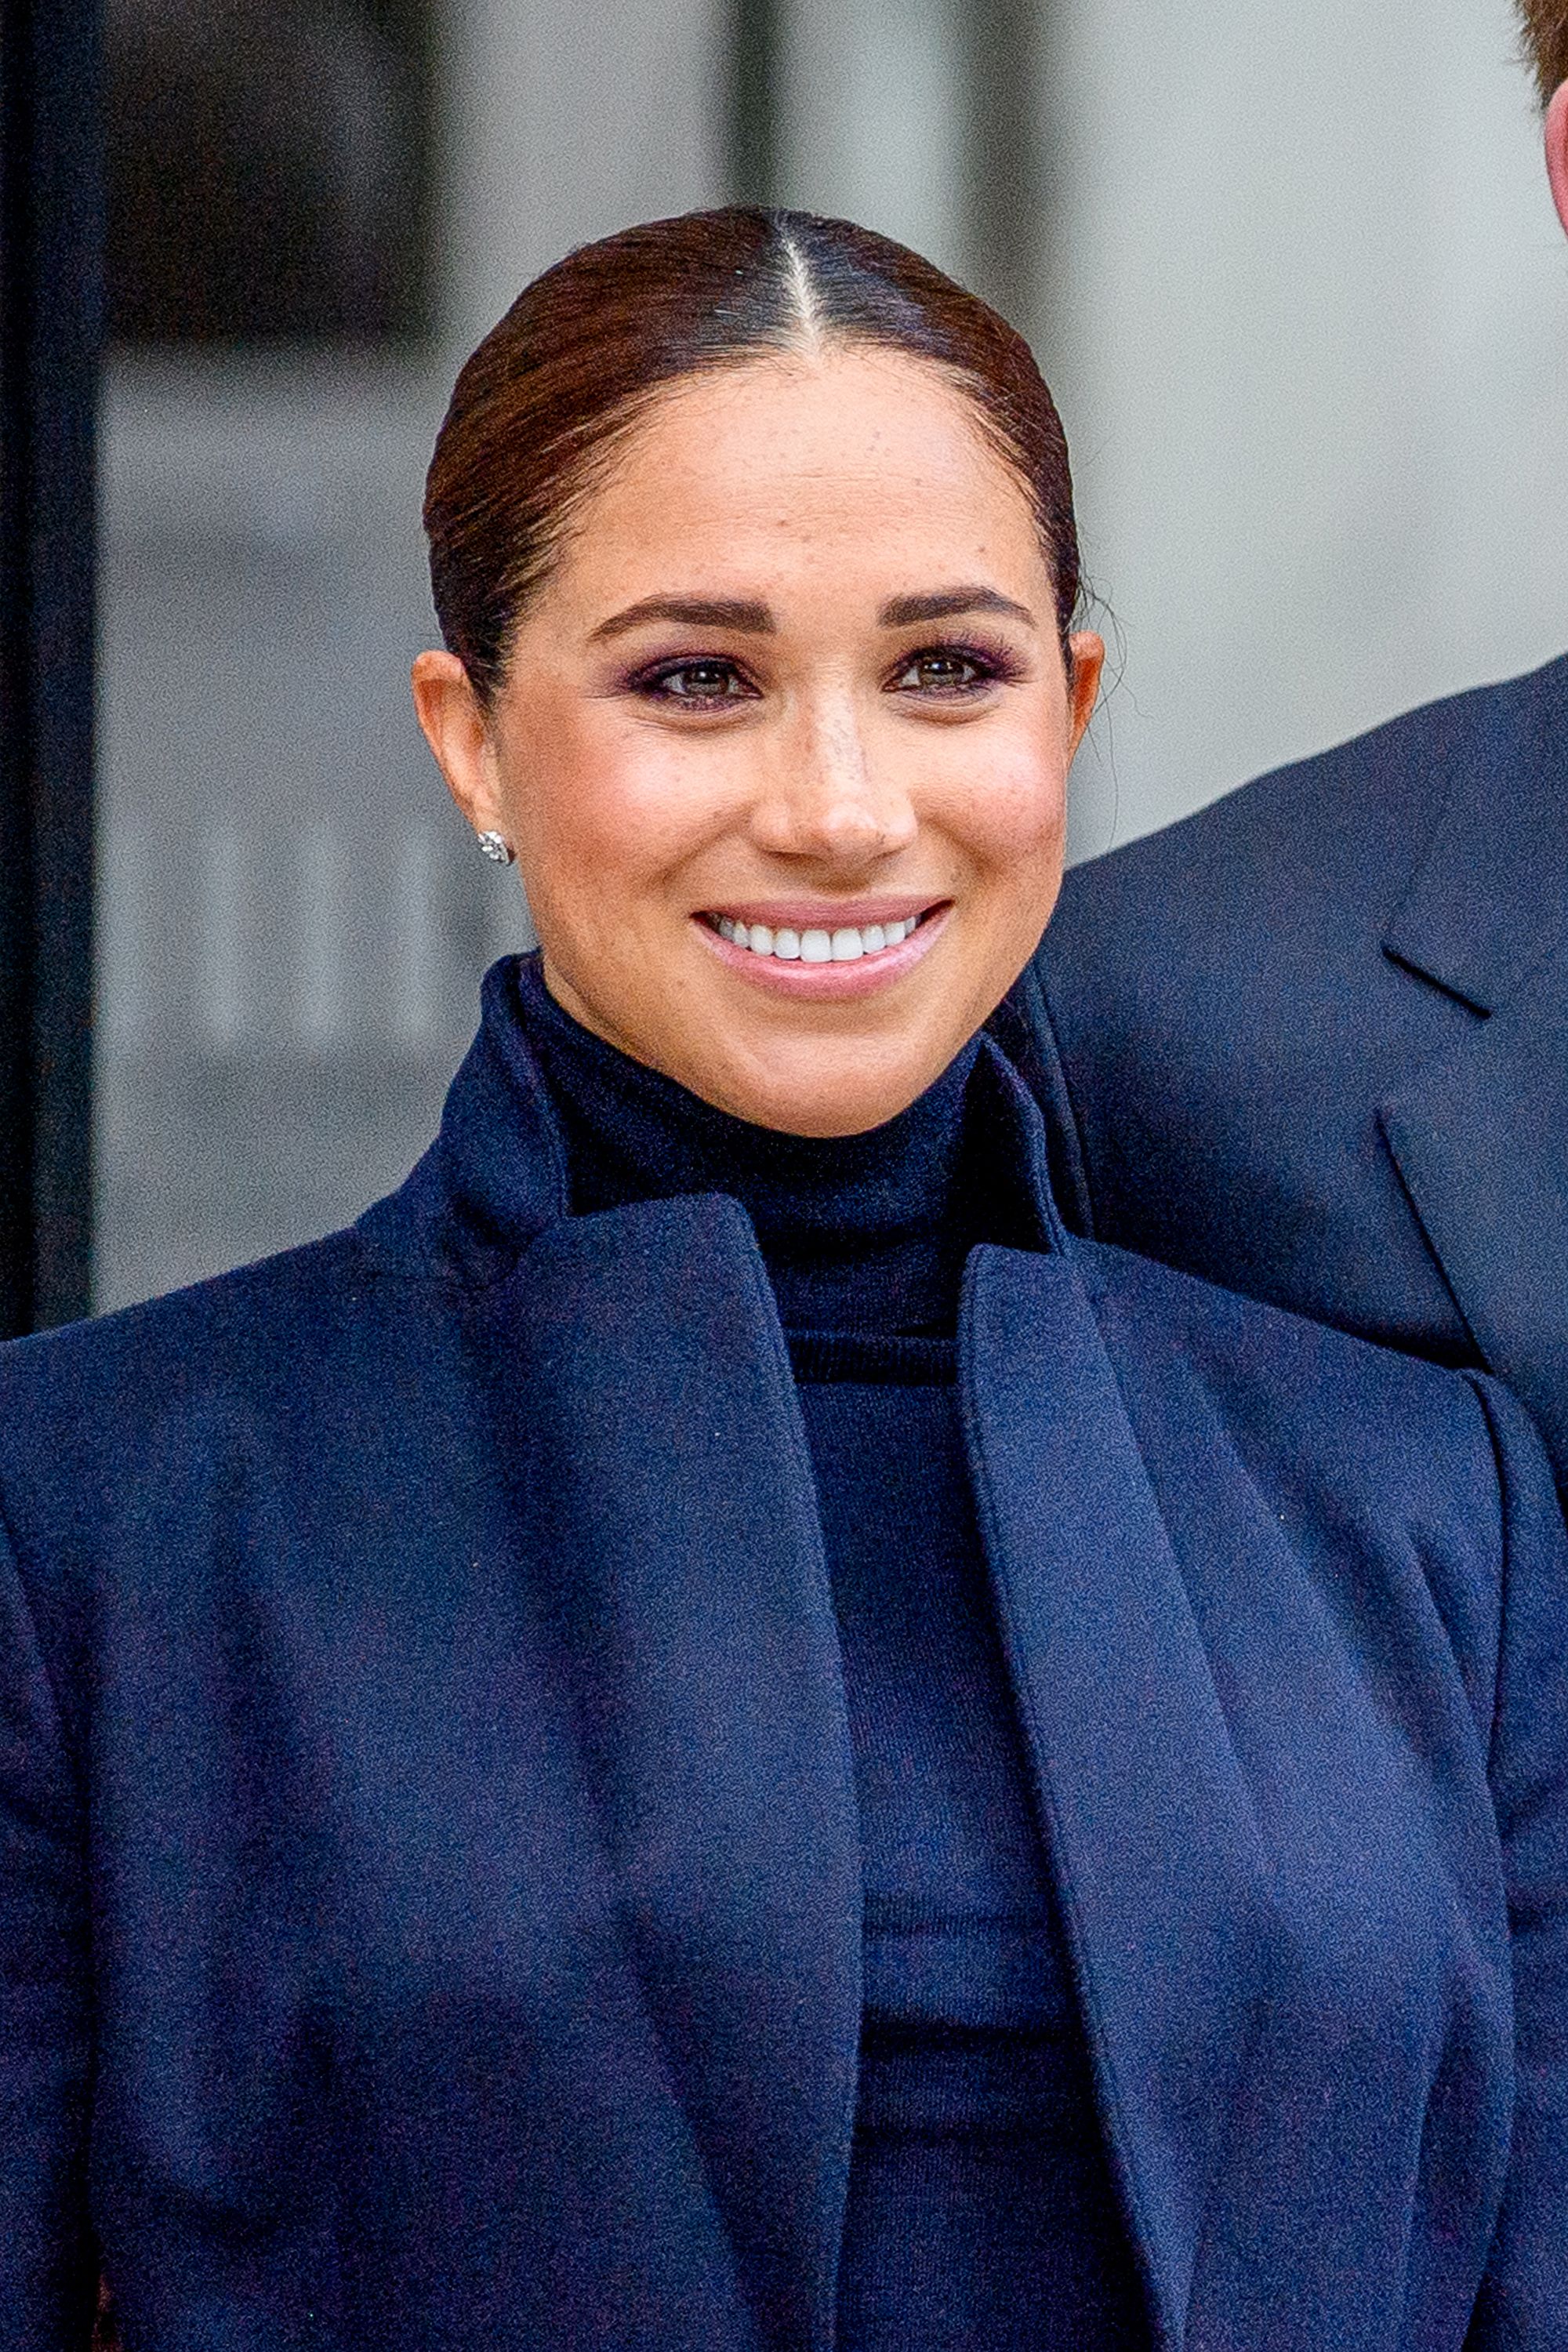 Meghan Markle and Cuyana Dressing Women for Success with Big Donation